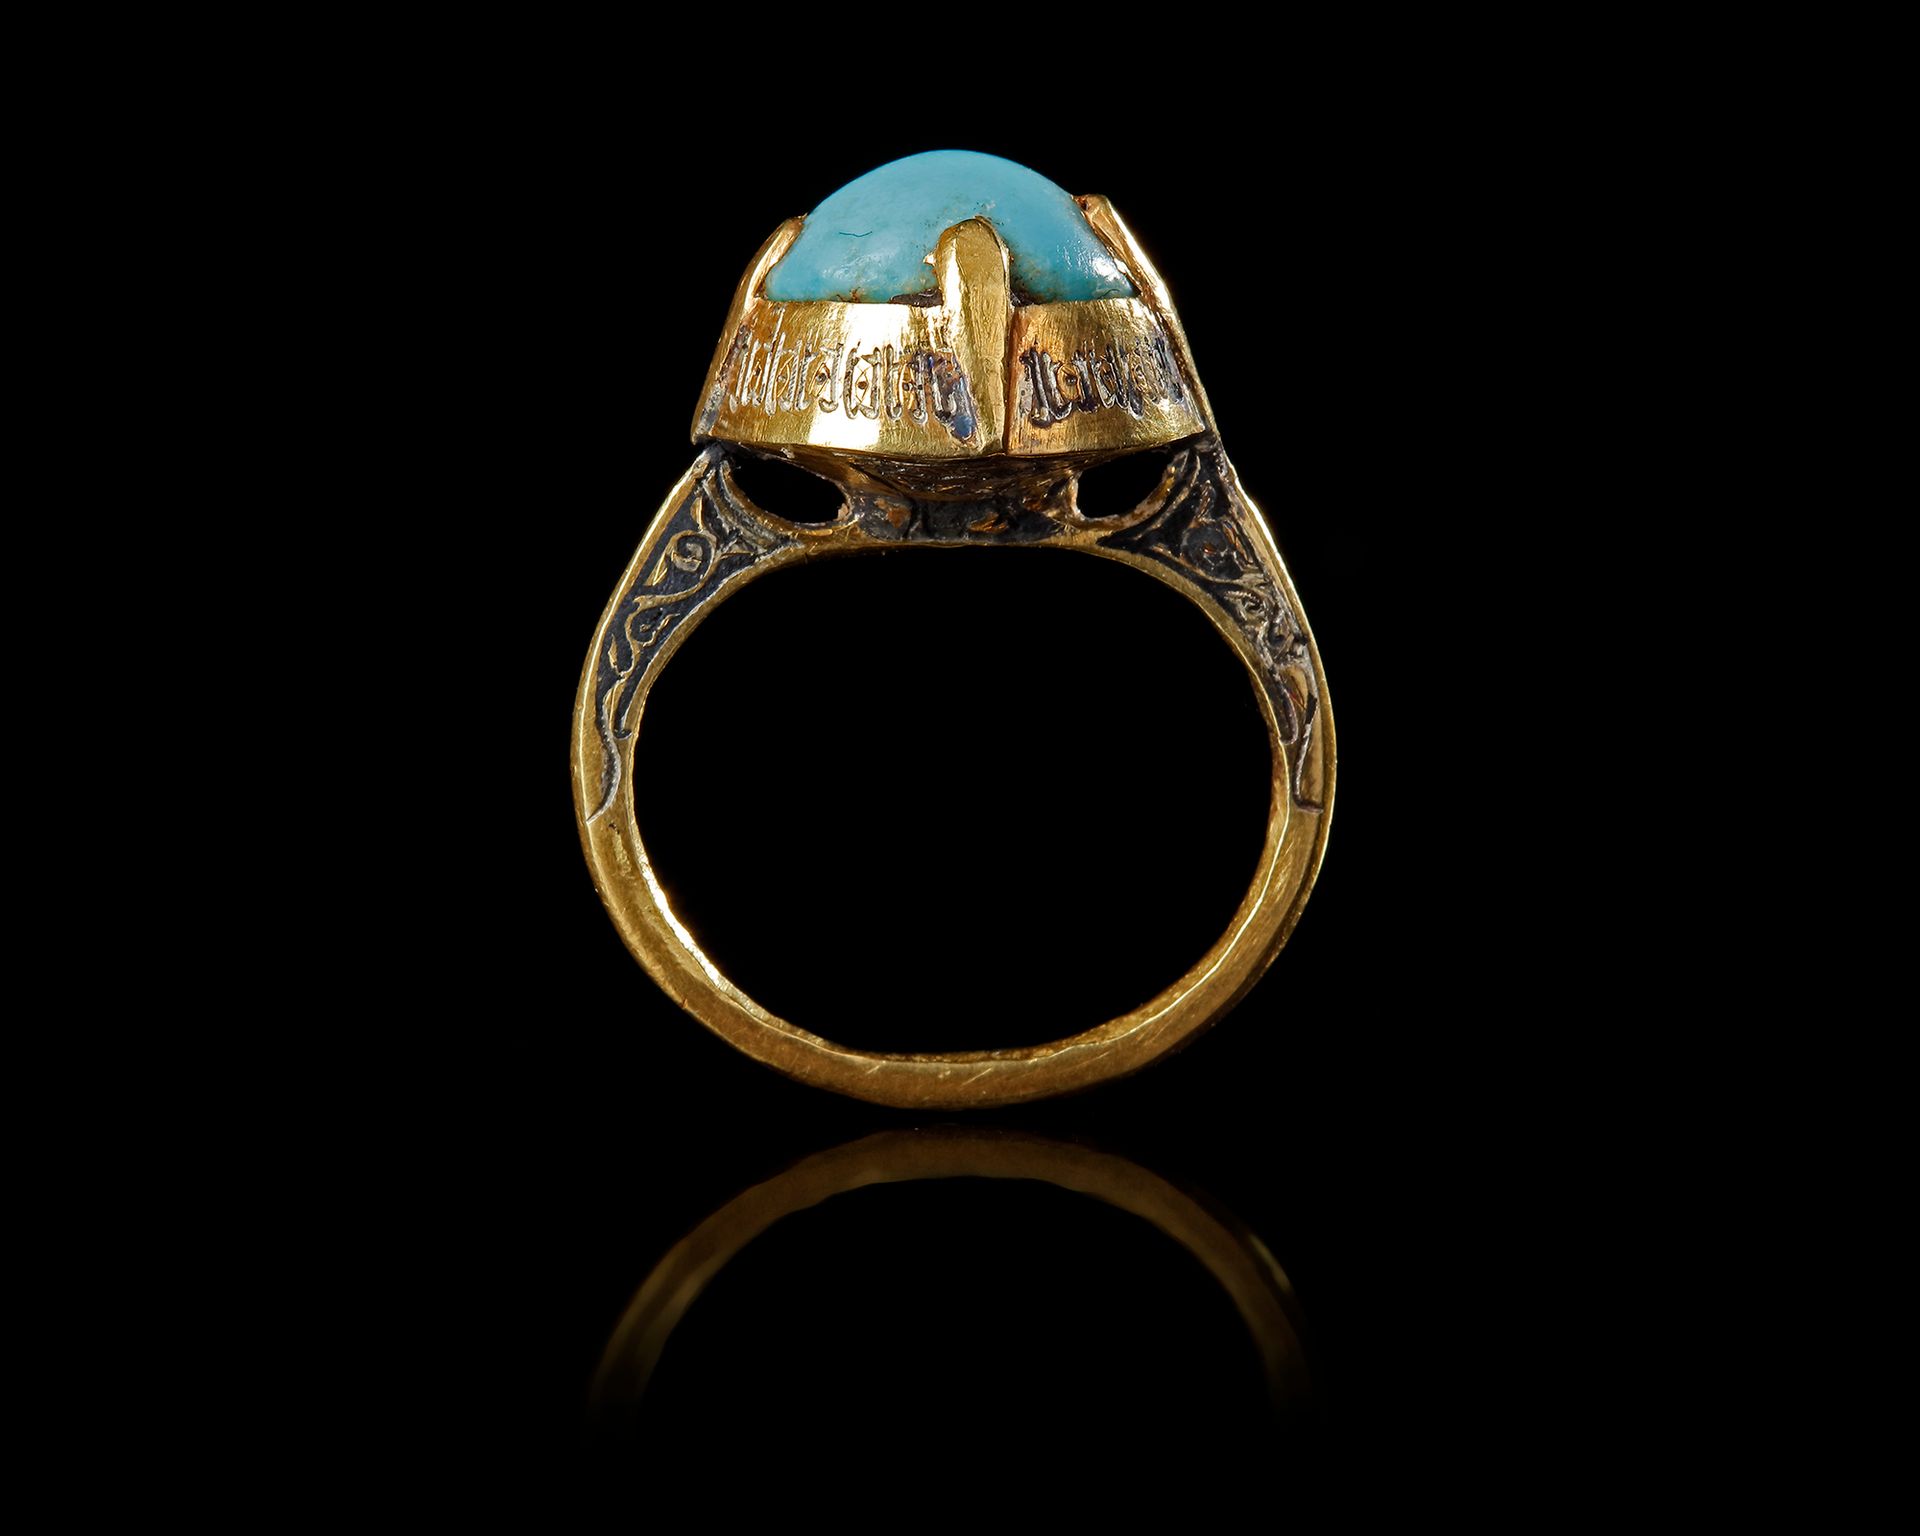 A SELJUK NIELLOED GOLD RING WITH TURQUOISE, PERSIA, 12TH-13TH CENTURY Cast in go&hellip;